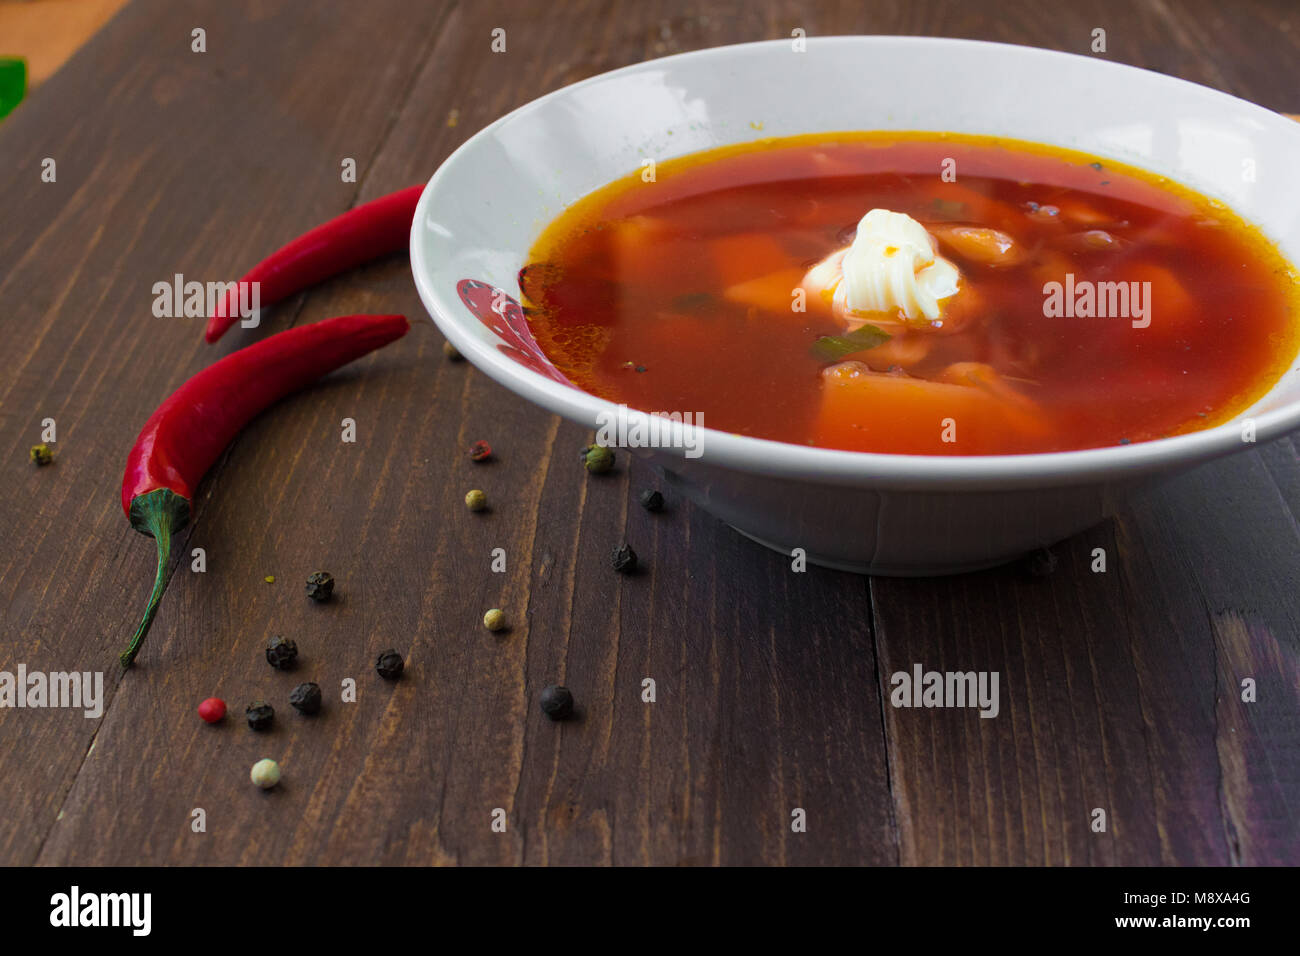 A bowl of borsch with sour cream. Spices and chili pepper are spilled around the plate Stock Photo